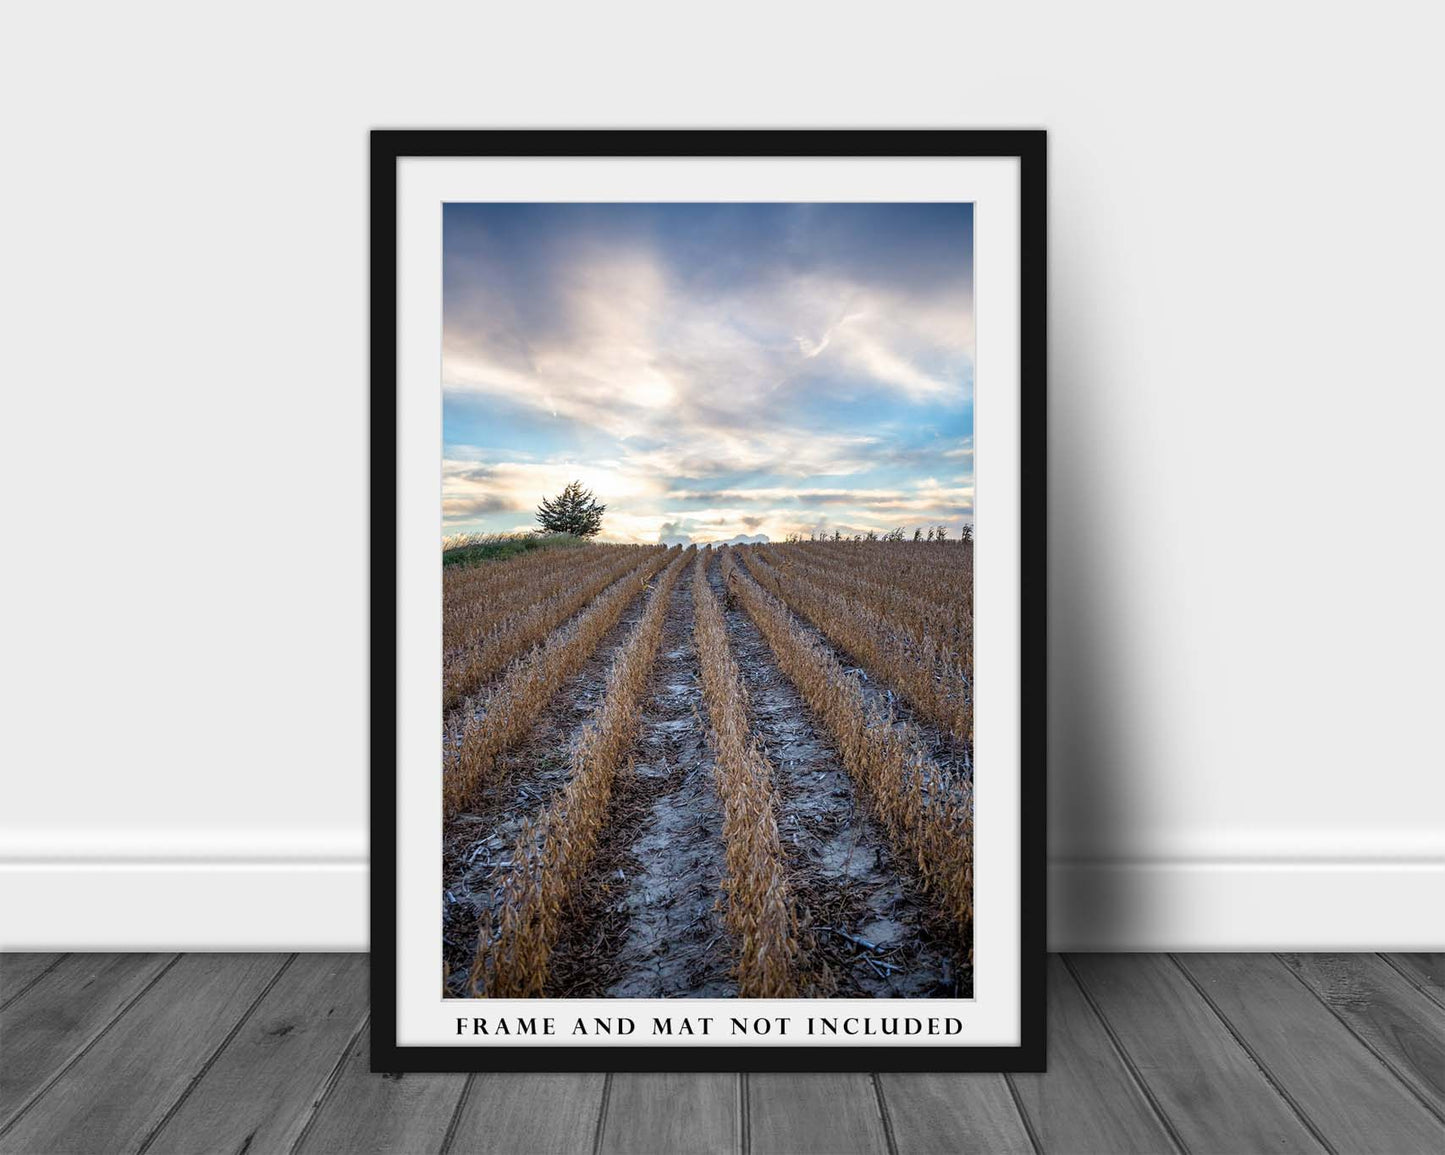 Farming Photography Print - Picture of Soybean Rows in Eastern Nebraska Field Farm Photo Country Home Decor 4x6 to 40x60